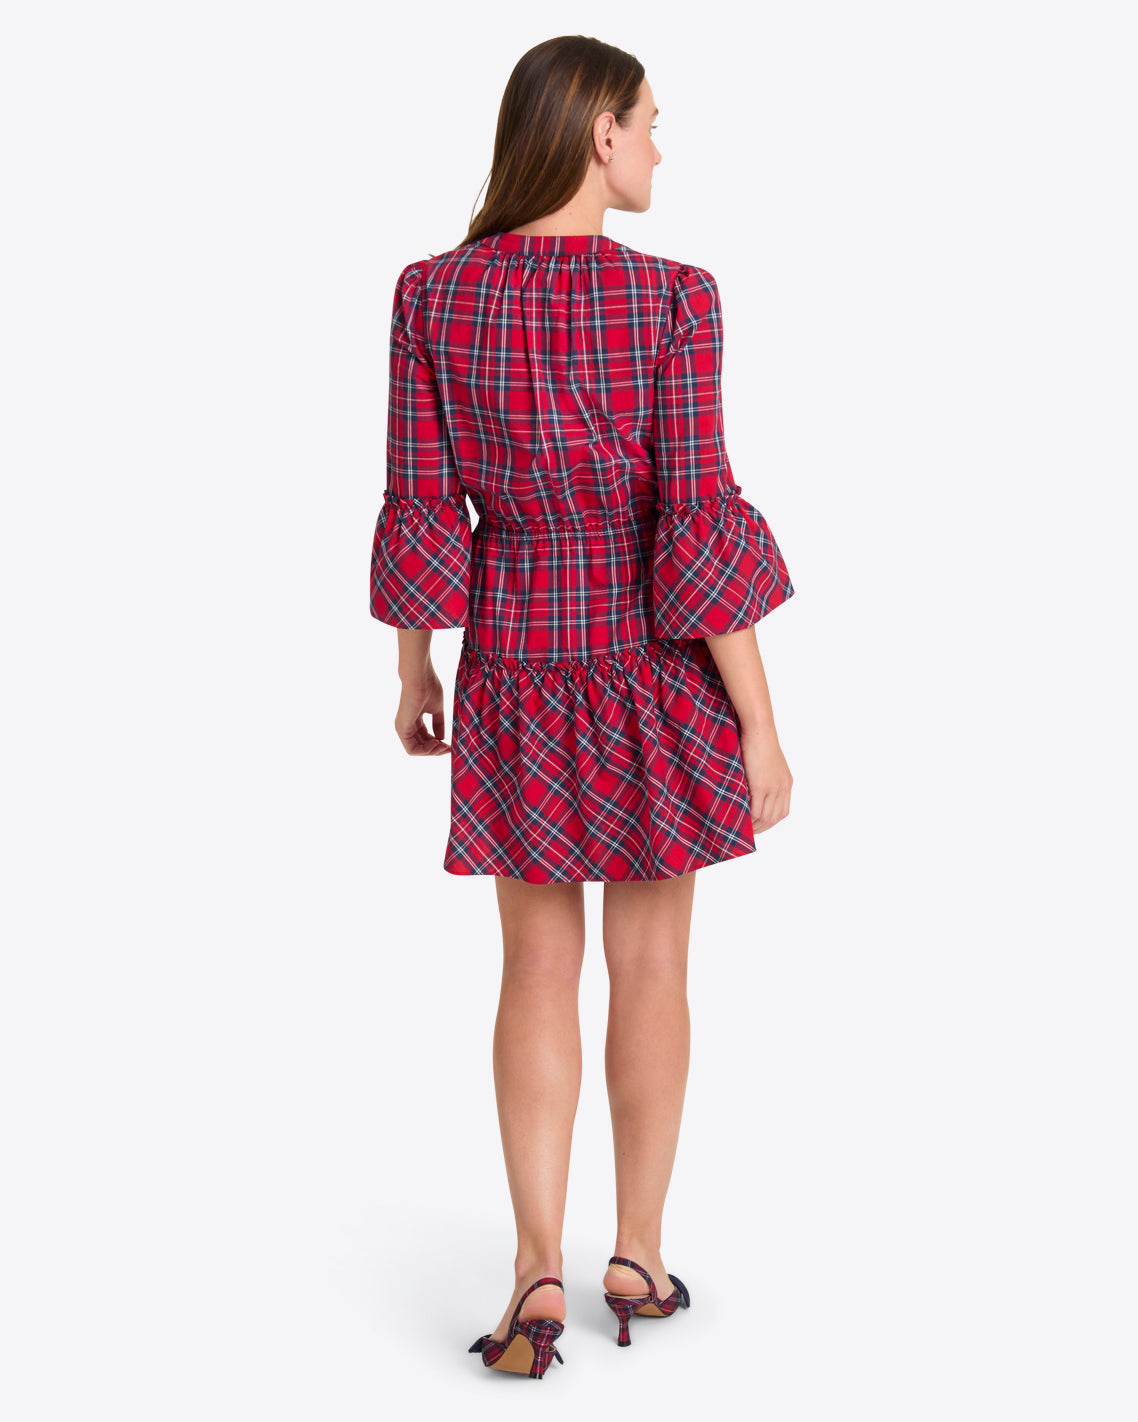 Avery Shirtdress in Angie Plaid